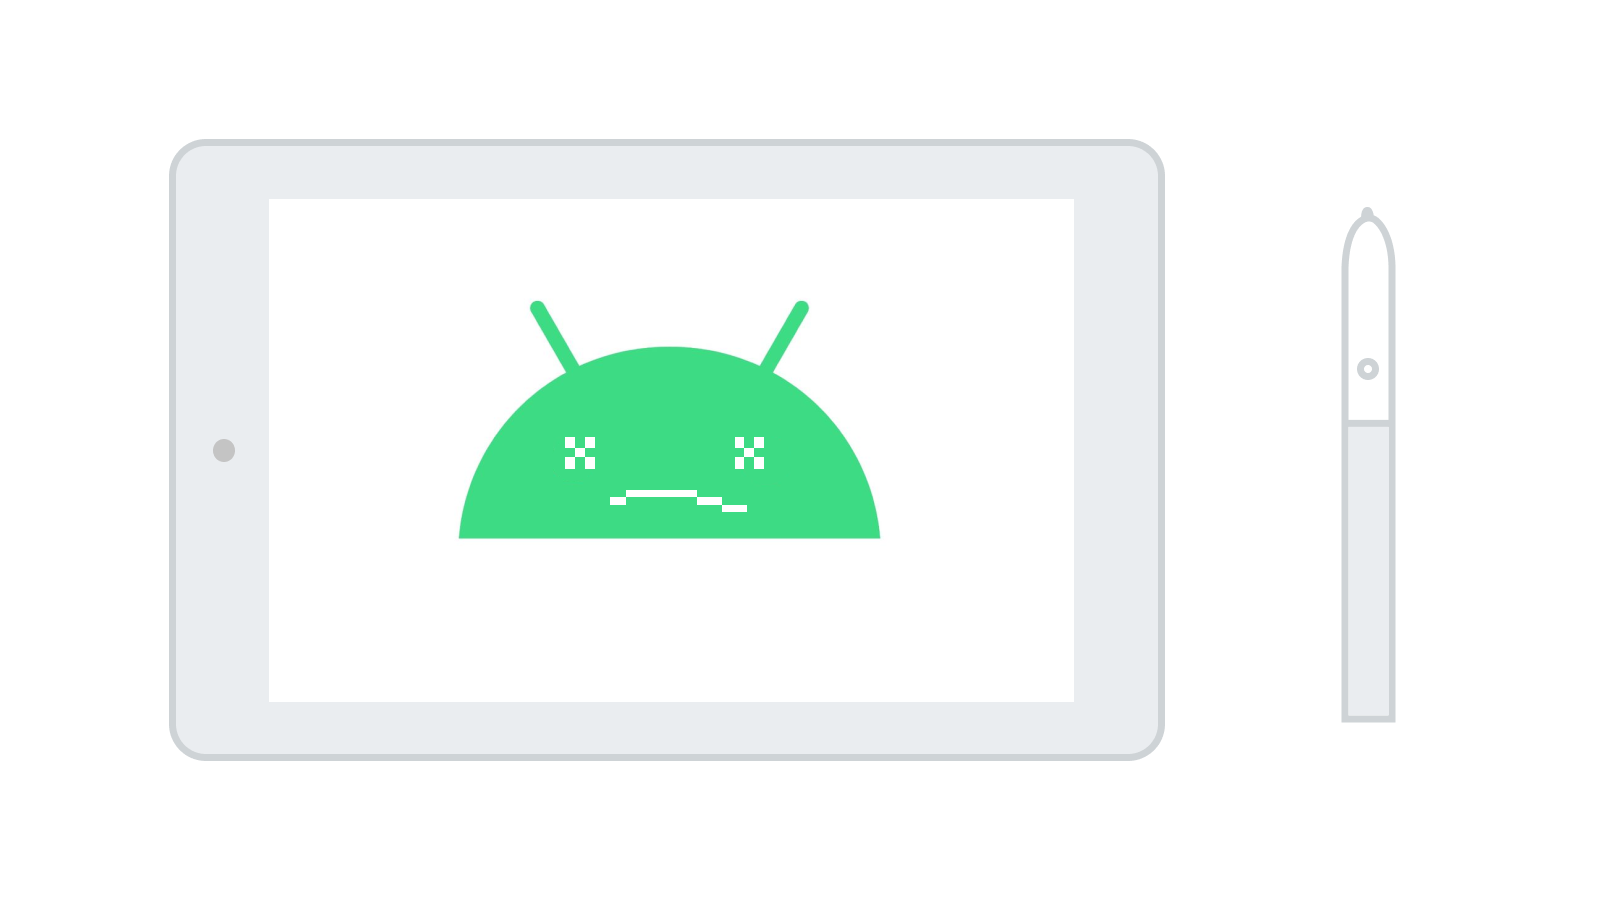 In Chrome OS 87, Google promptly fixes Android app input bug